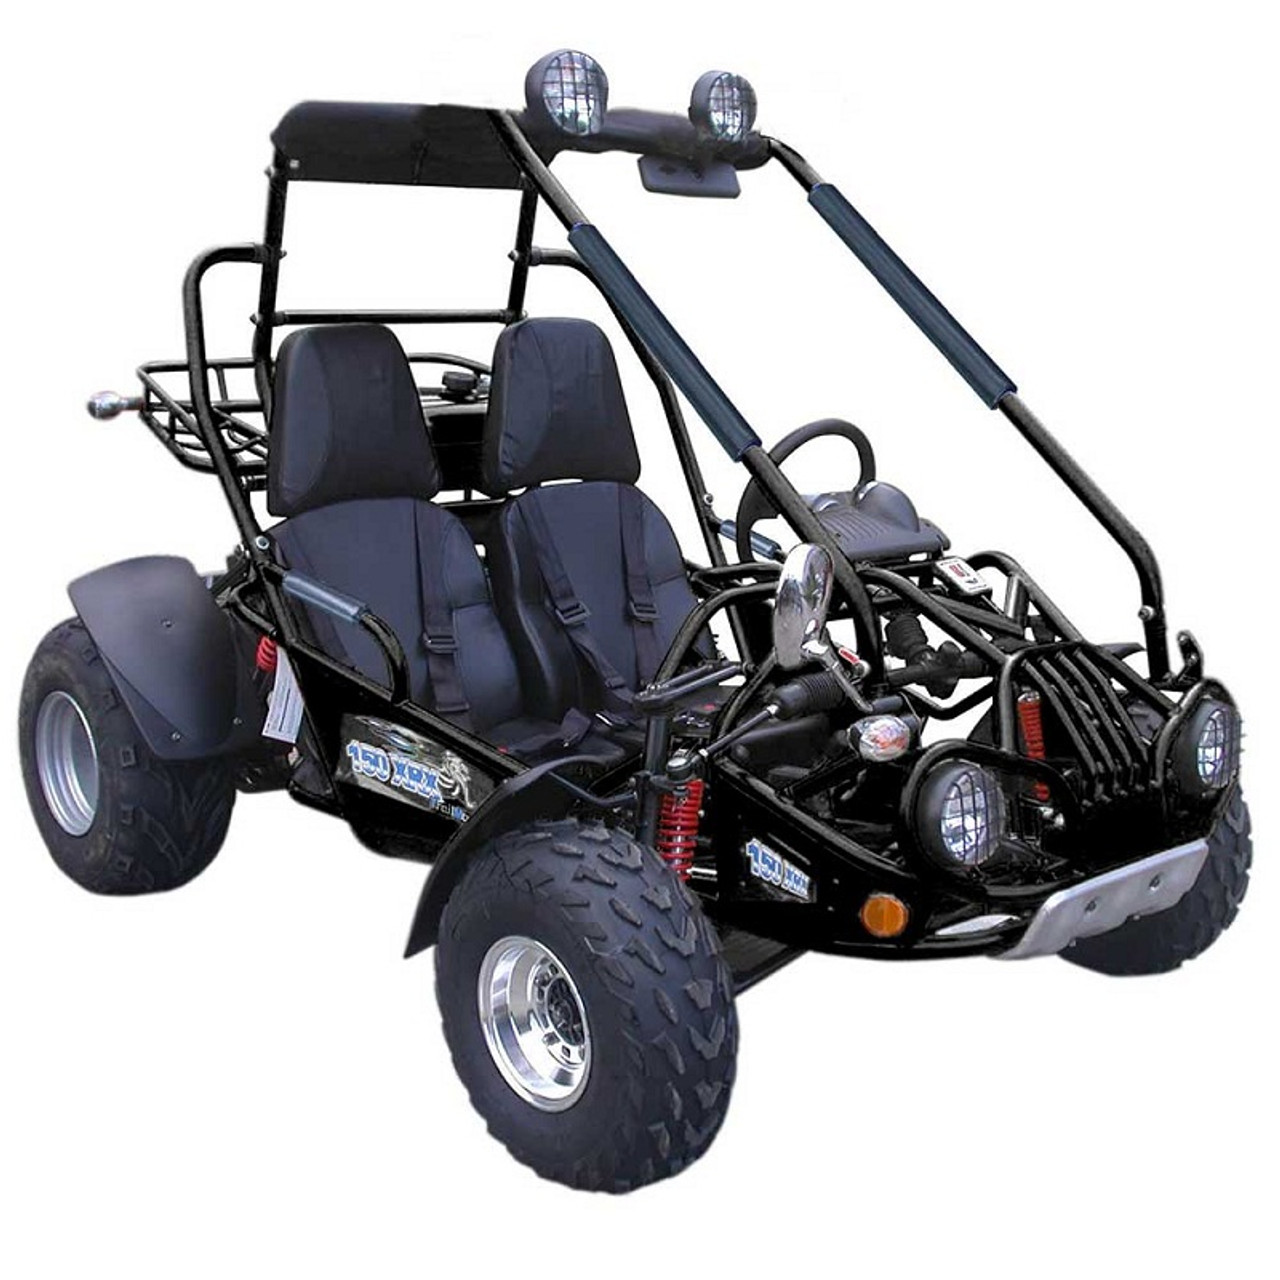 Trailmaster 200XRX High Quality 200CC Electric Start 4-Stroke, Single Cylinder, Air Cooled Go Kart